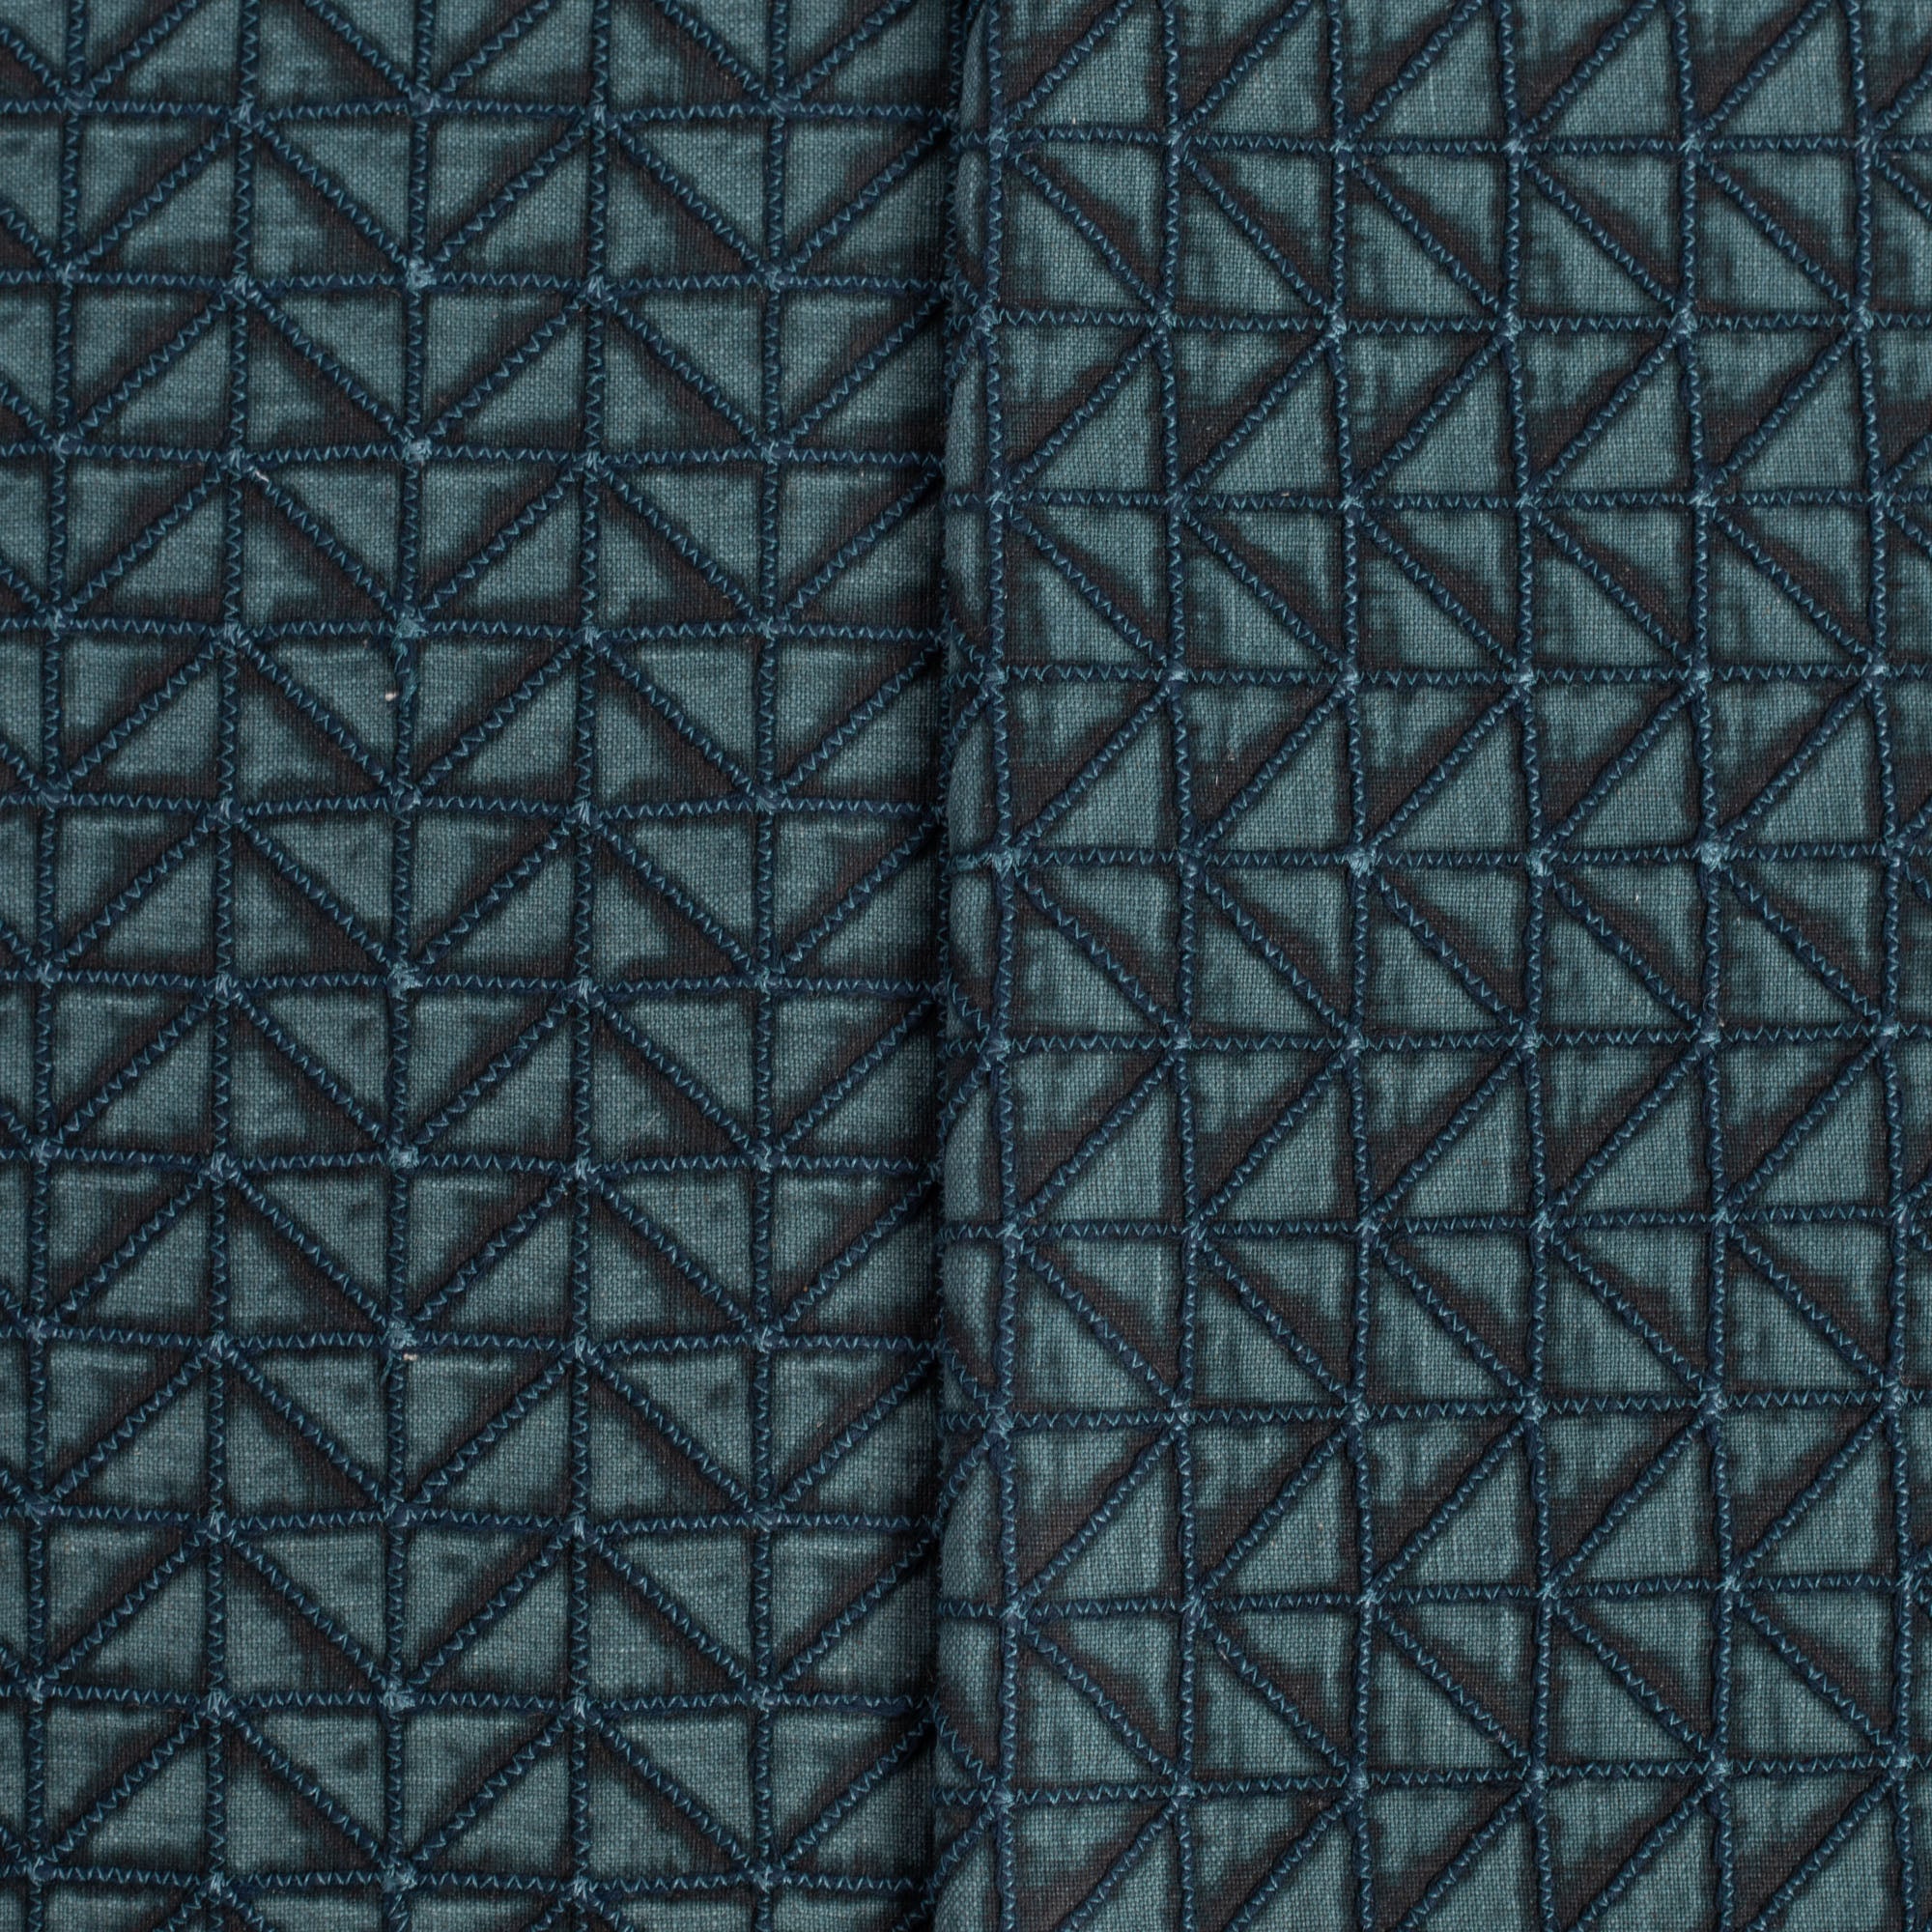 Torello Aegean, a teal blue geometric zig zag embroidered pattern fabric : view 6